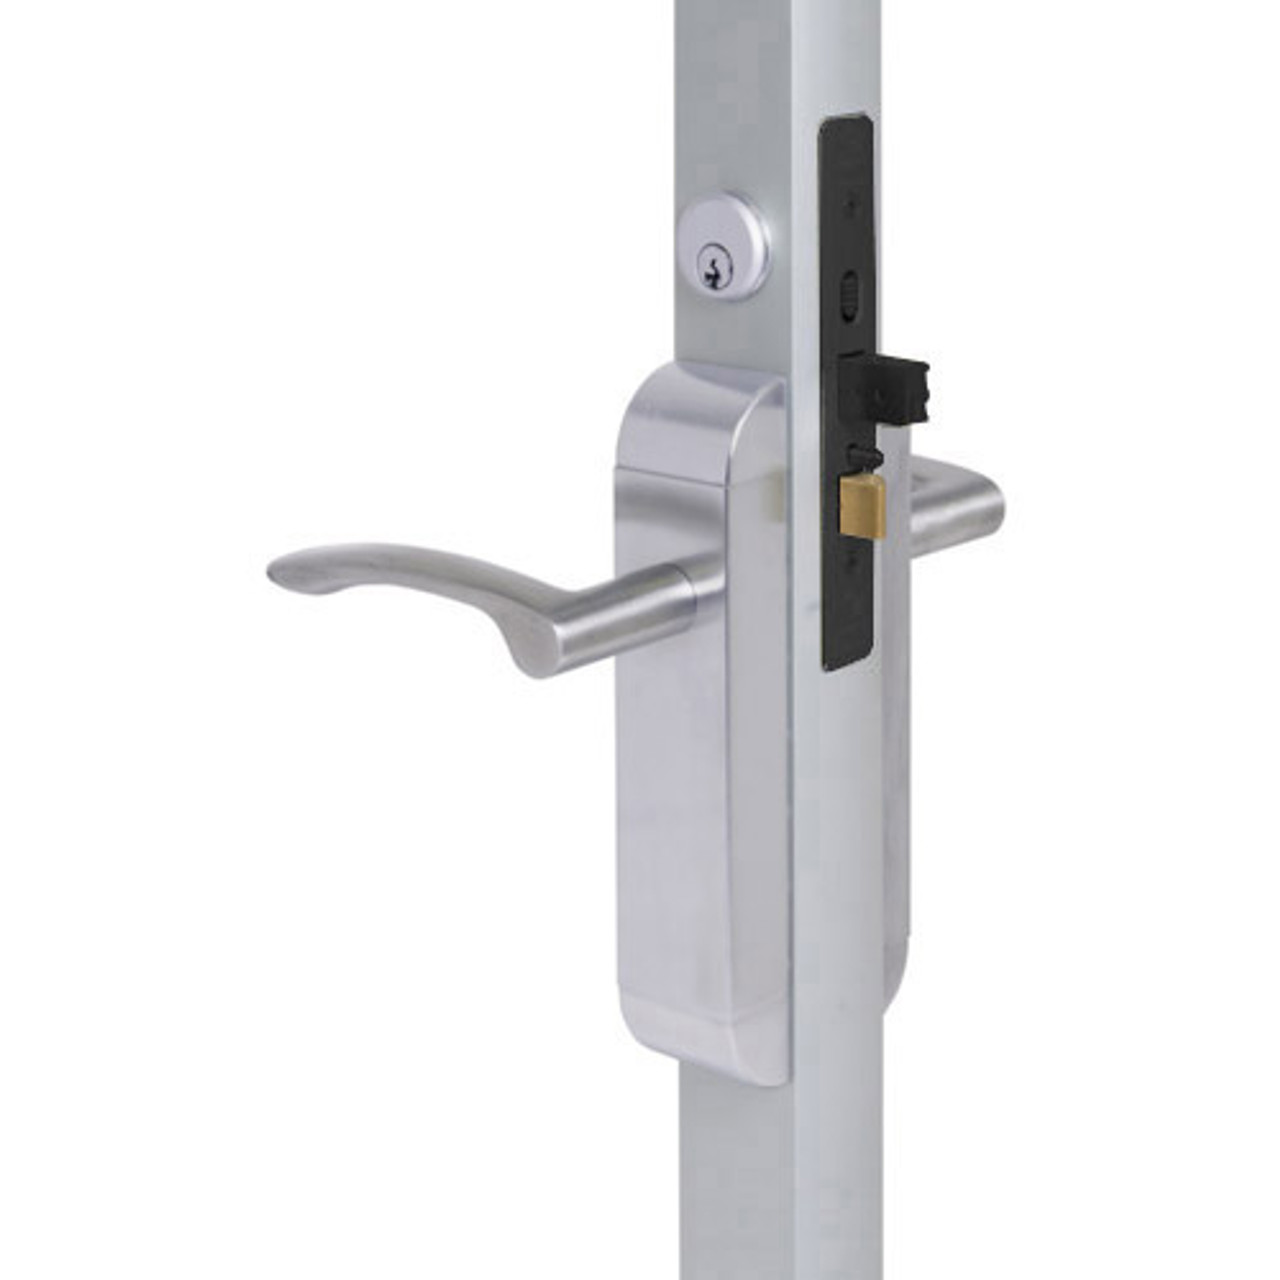 2290-313-203-32 Adams Rite Dual Force Interconnected 2290 series Deadlock/Deadlatch in Bright Stainless